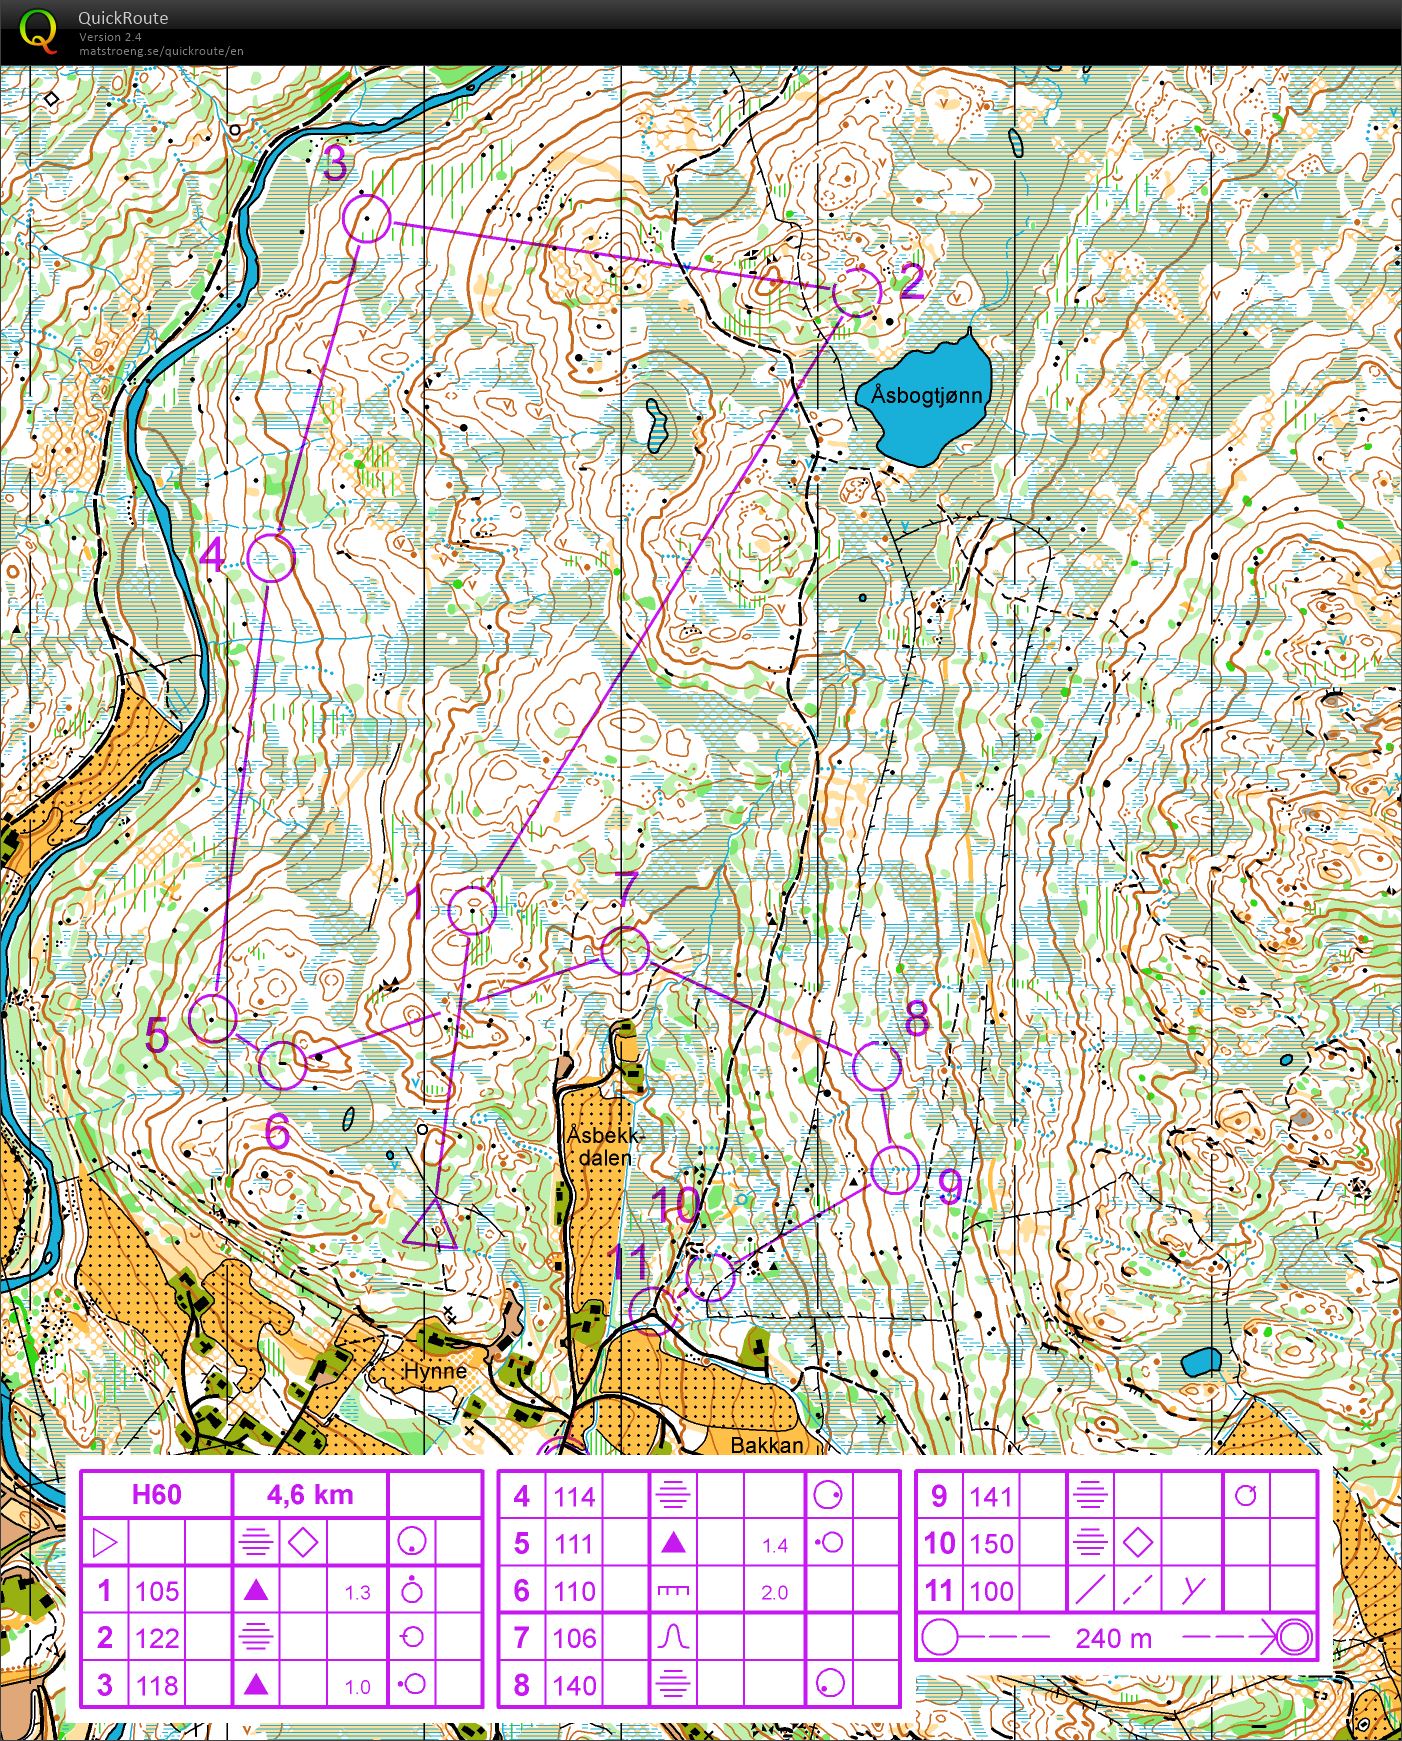 Re-run of H60 Long course from VM in Rauland (12.10.2017)